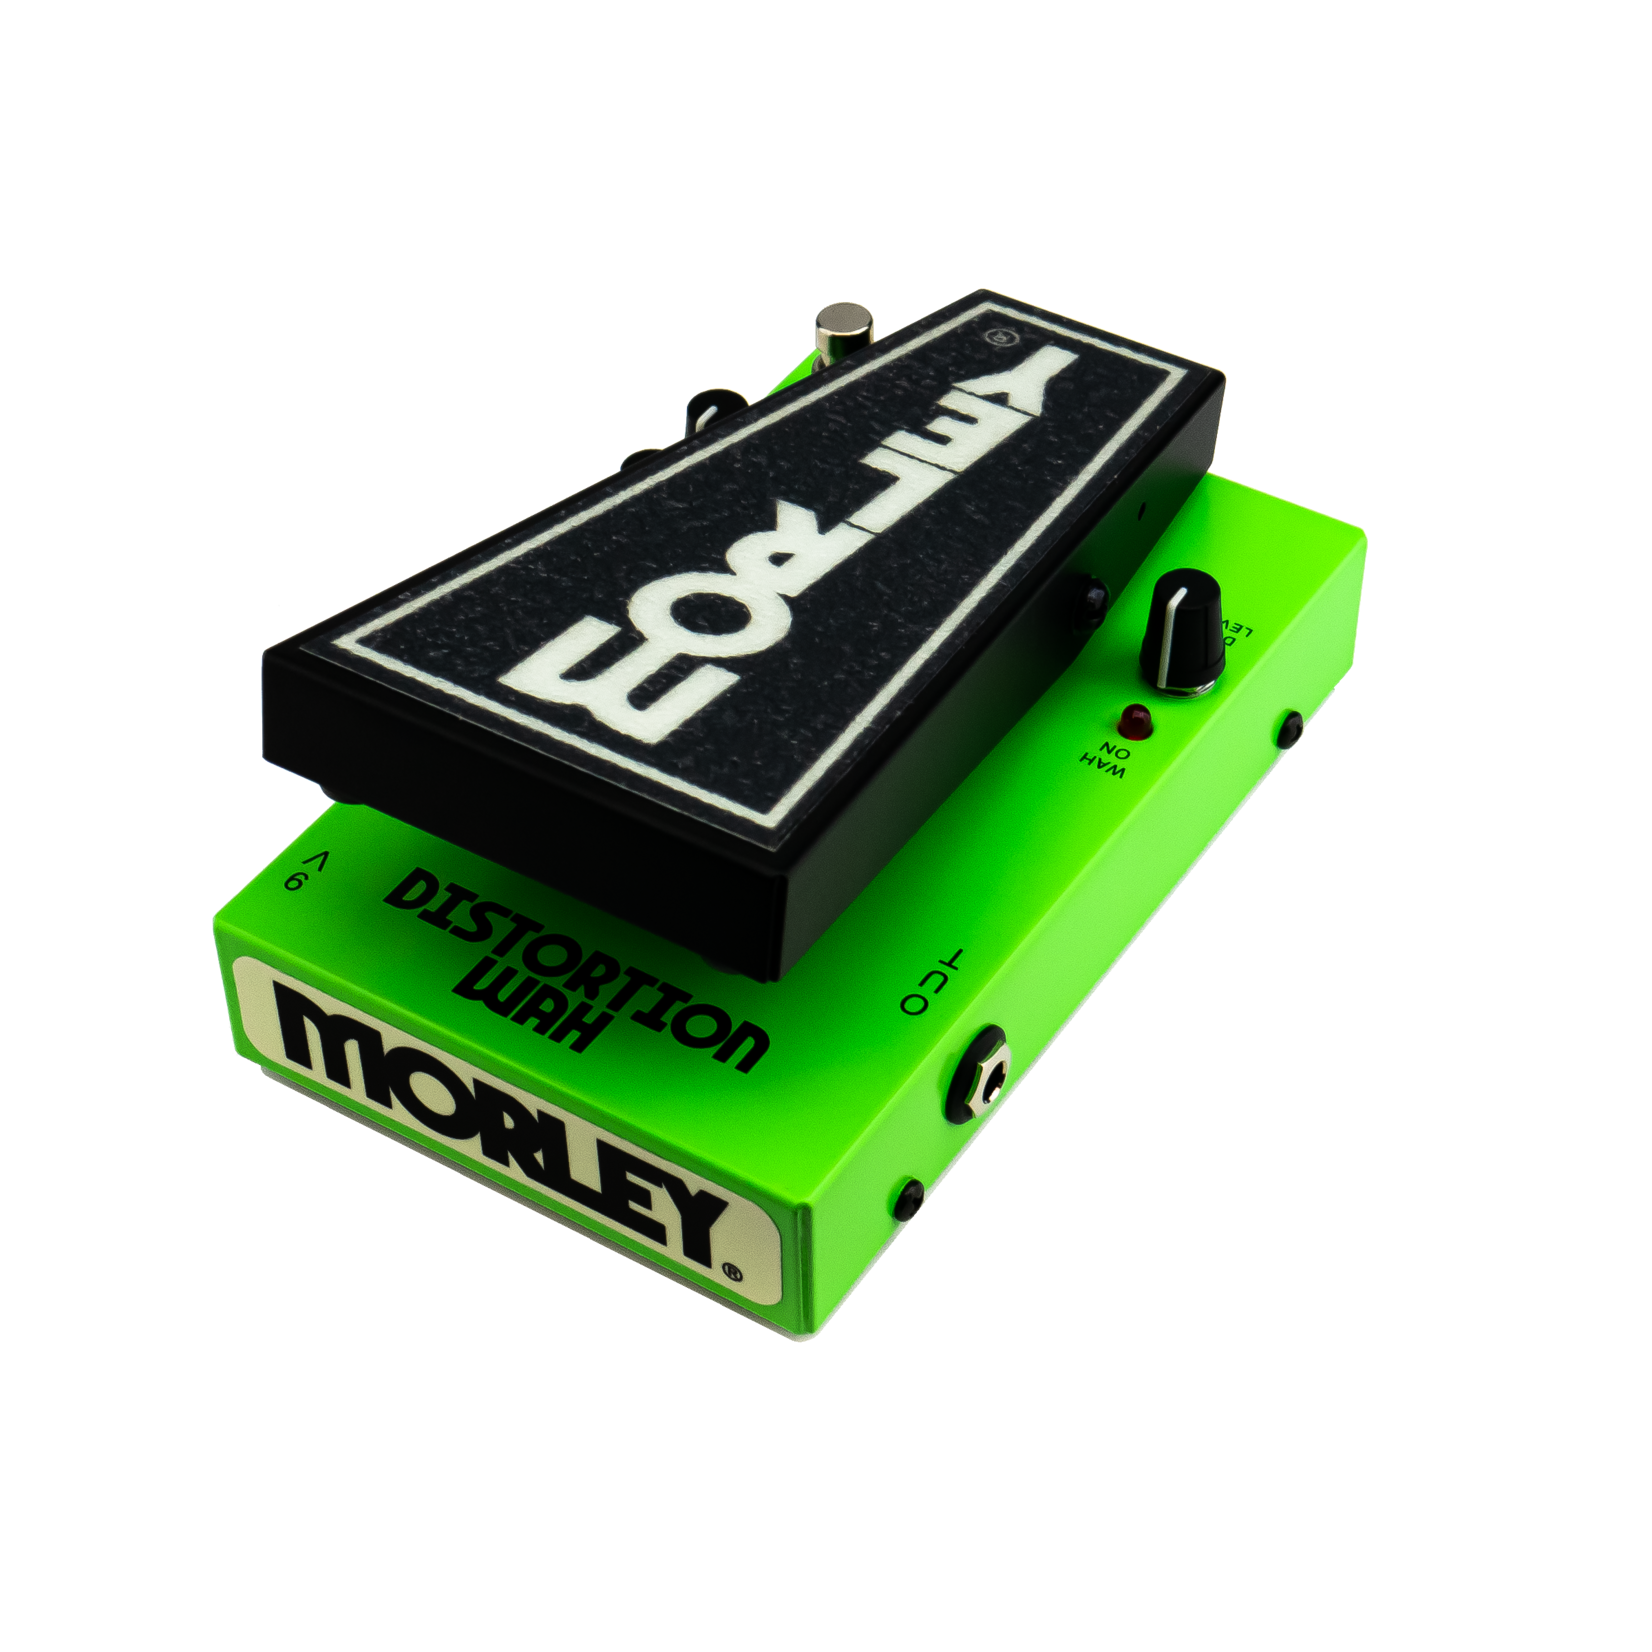 Morley Morley 20/20 Distortion Wah - classic tone combo with switchless activation, optical circuit, buffer